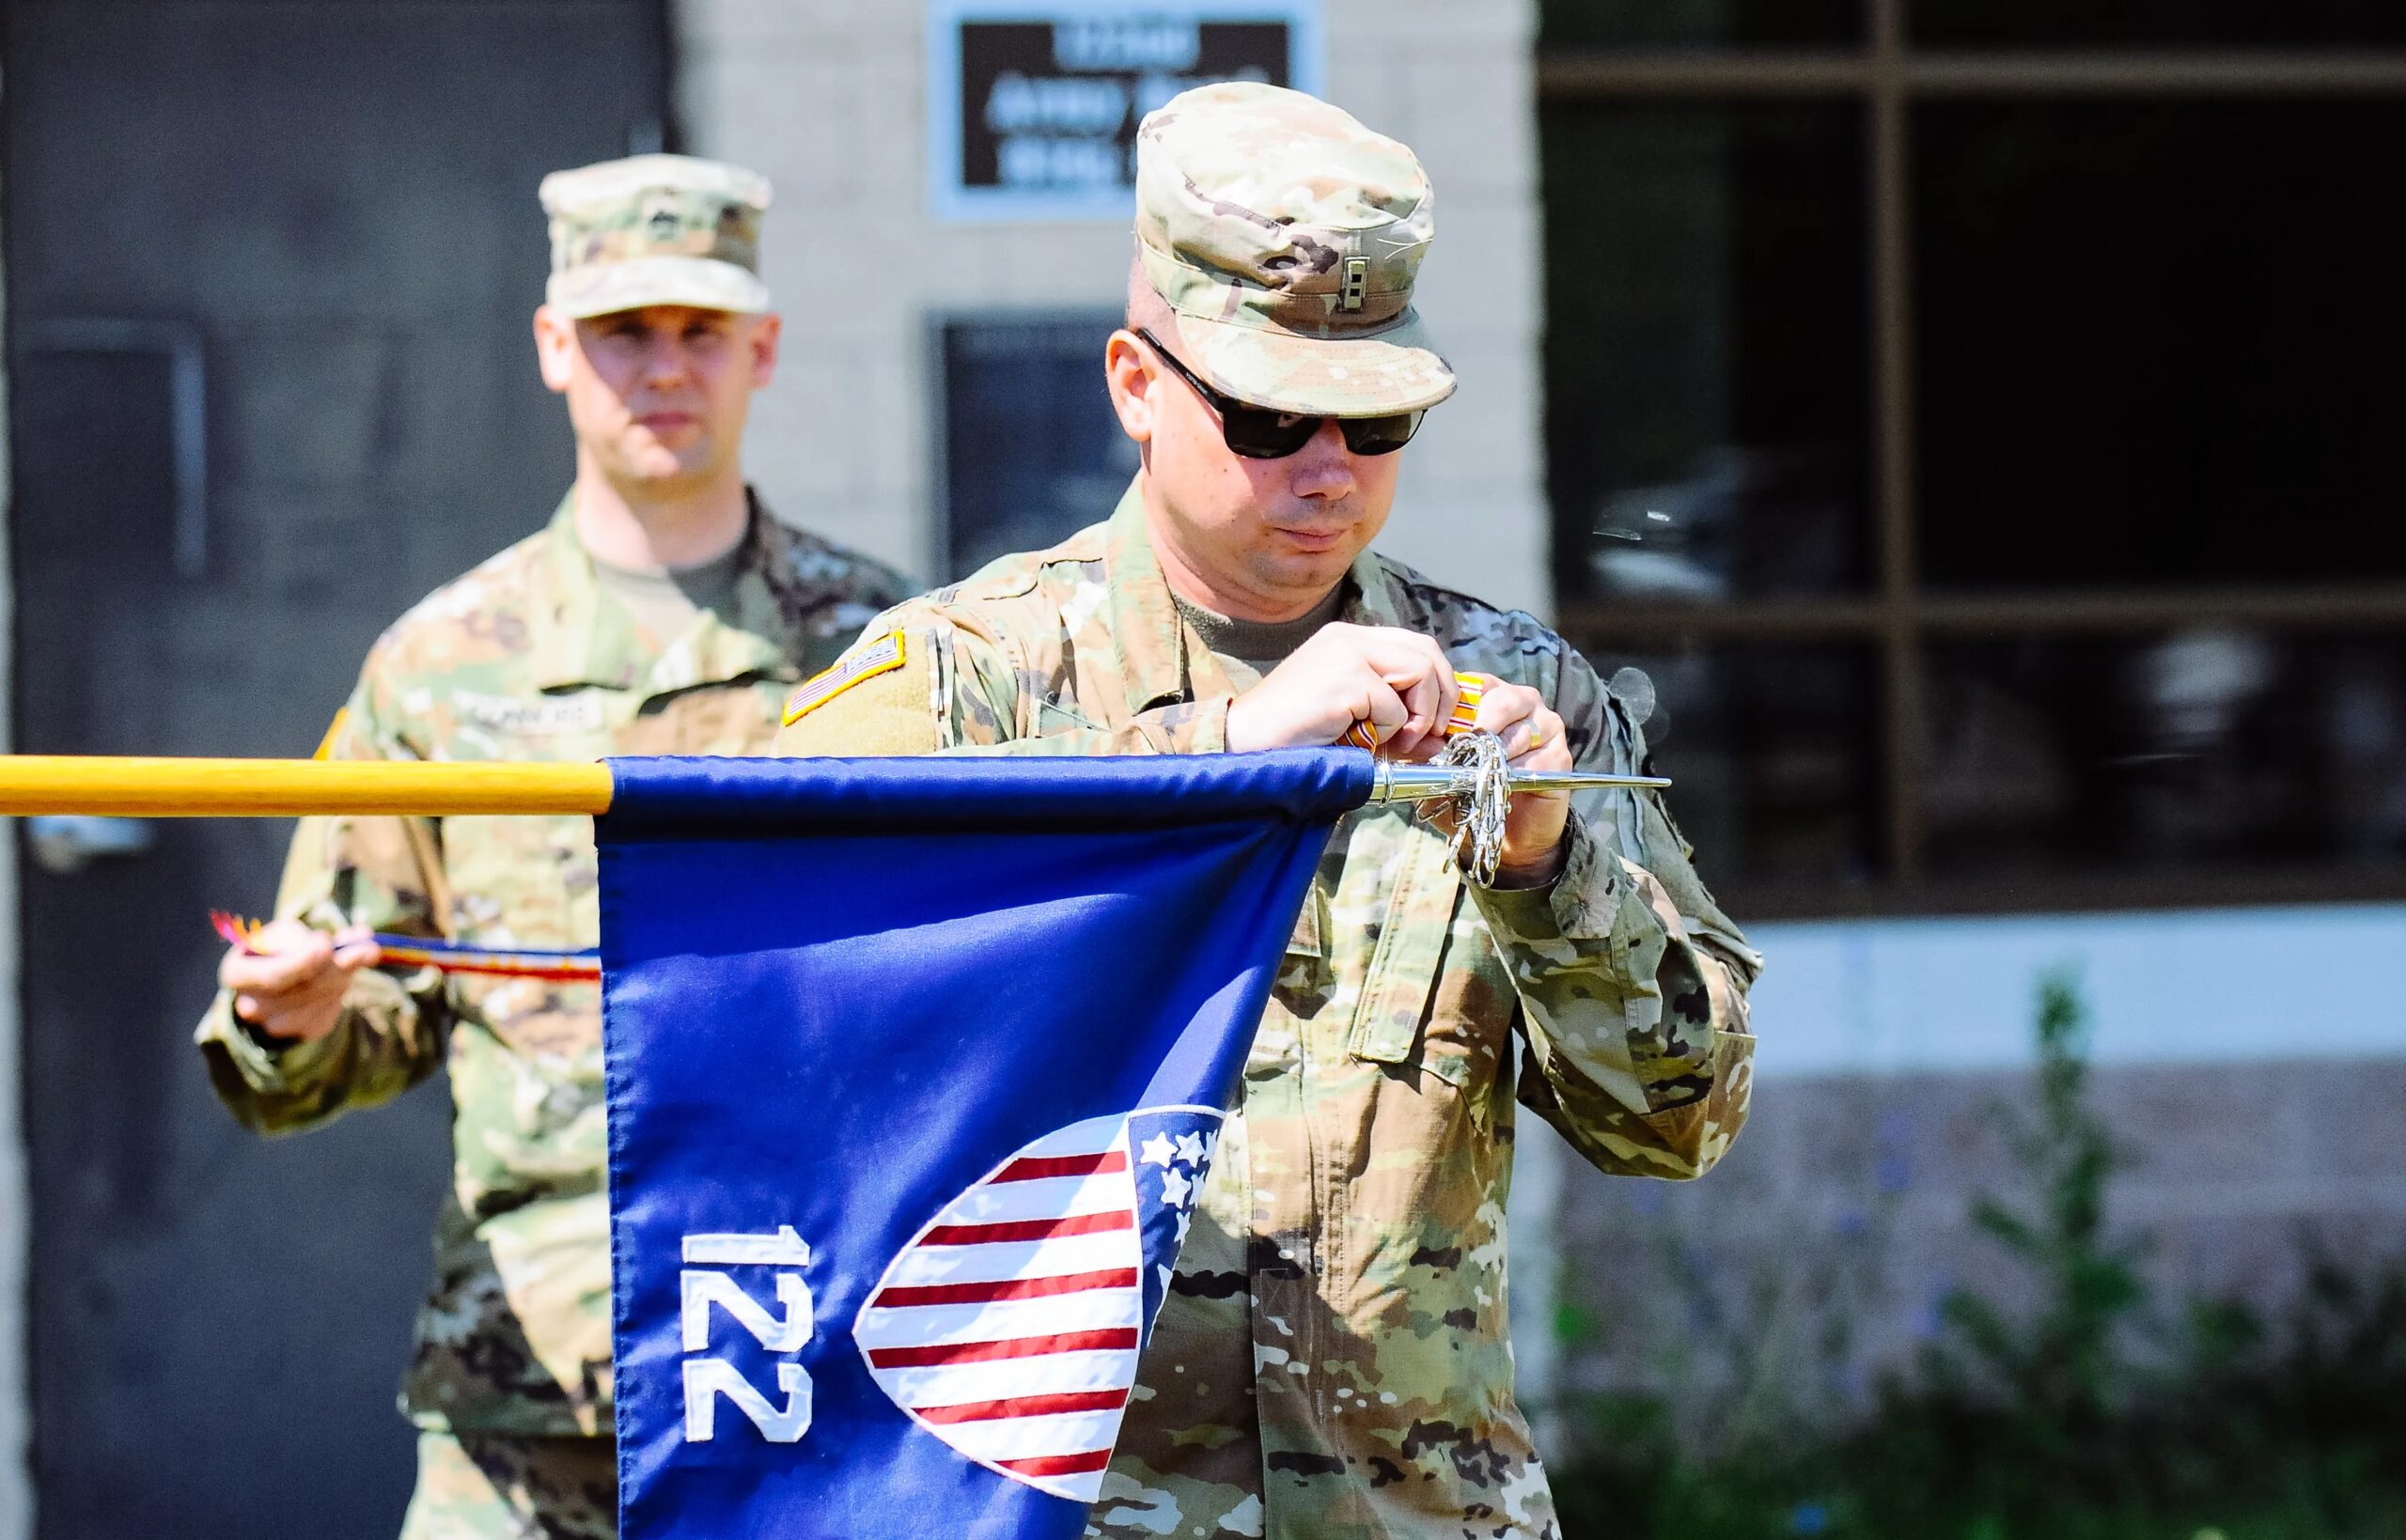 Some National Guard units haven’t followed order to ditch Confederate items: report